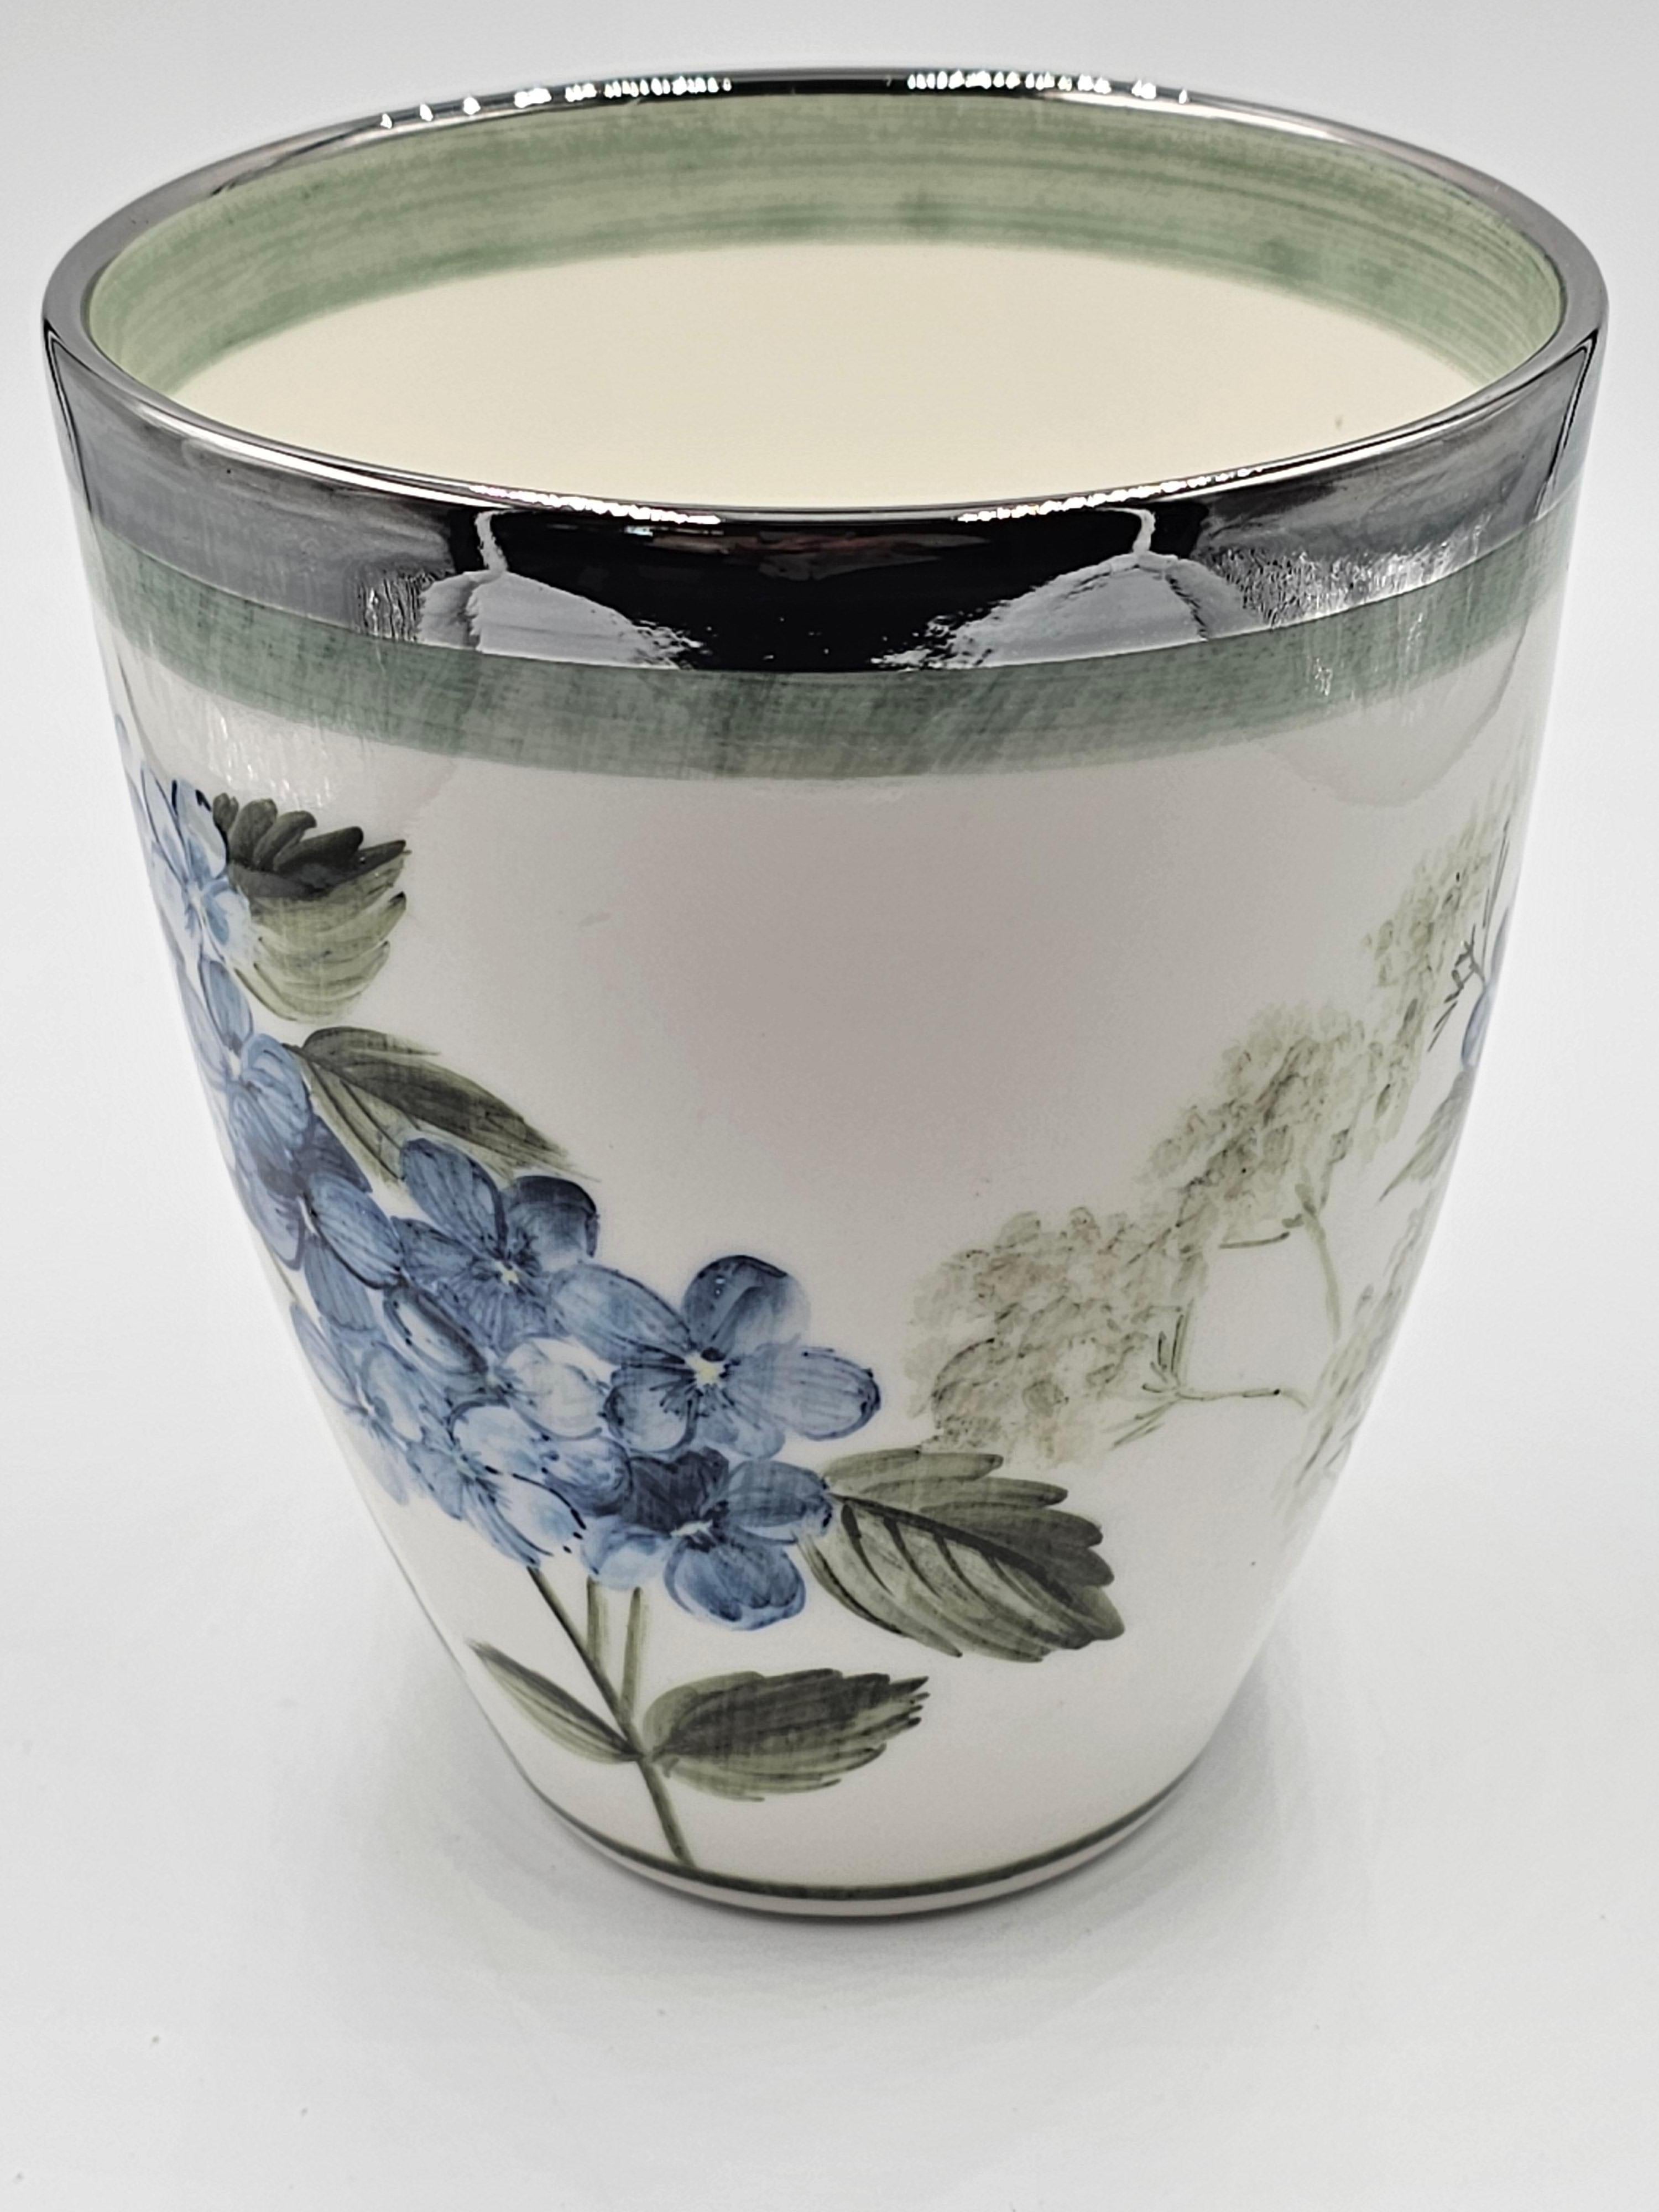 Hands-free painted porcelain vase with a flower decor all around. Rimmed with a platinum rim. Completely made by hand in Bavaria/Germany with a exclusive decor hydrangea in blue color for Sofina Boutique Kitzbühel.
Looks beautiful with fresh flowers